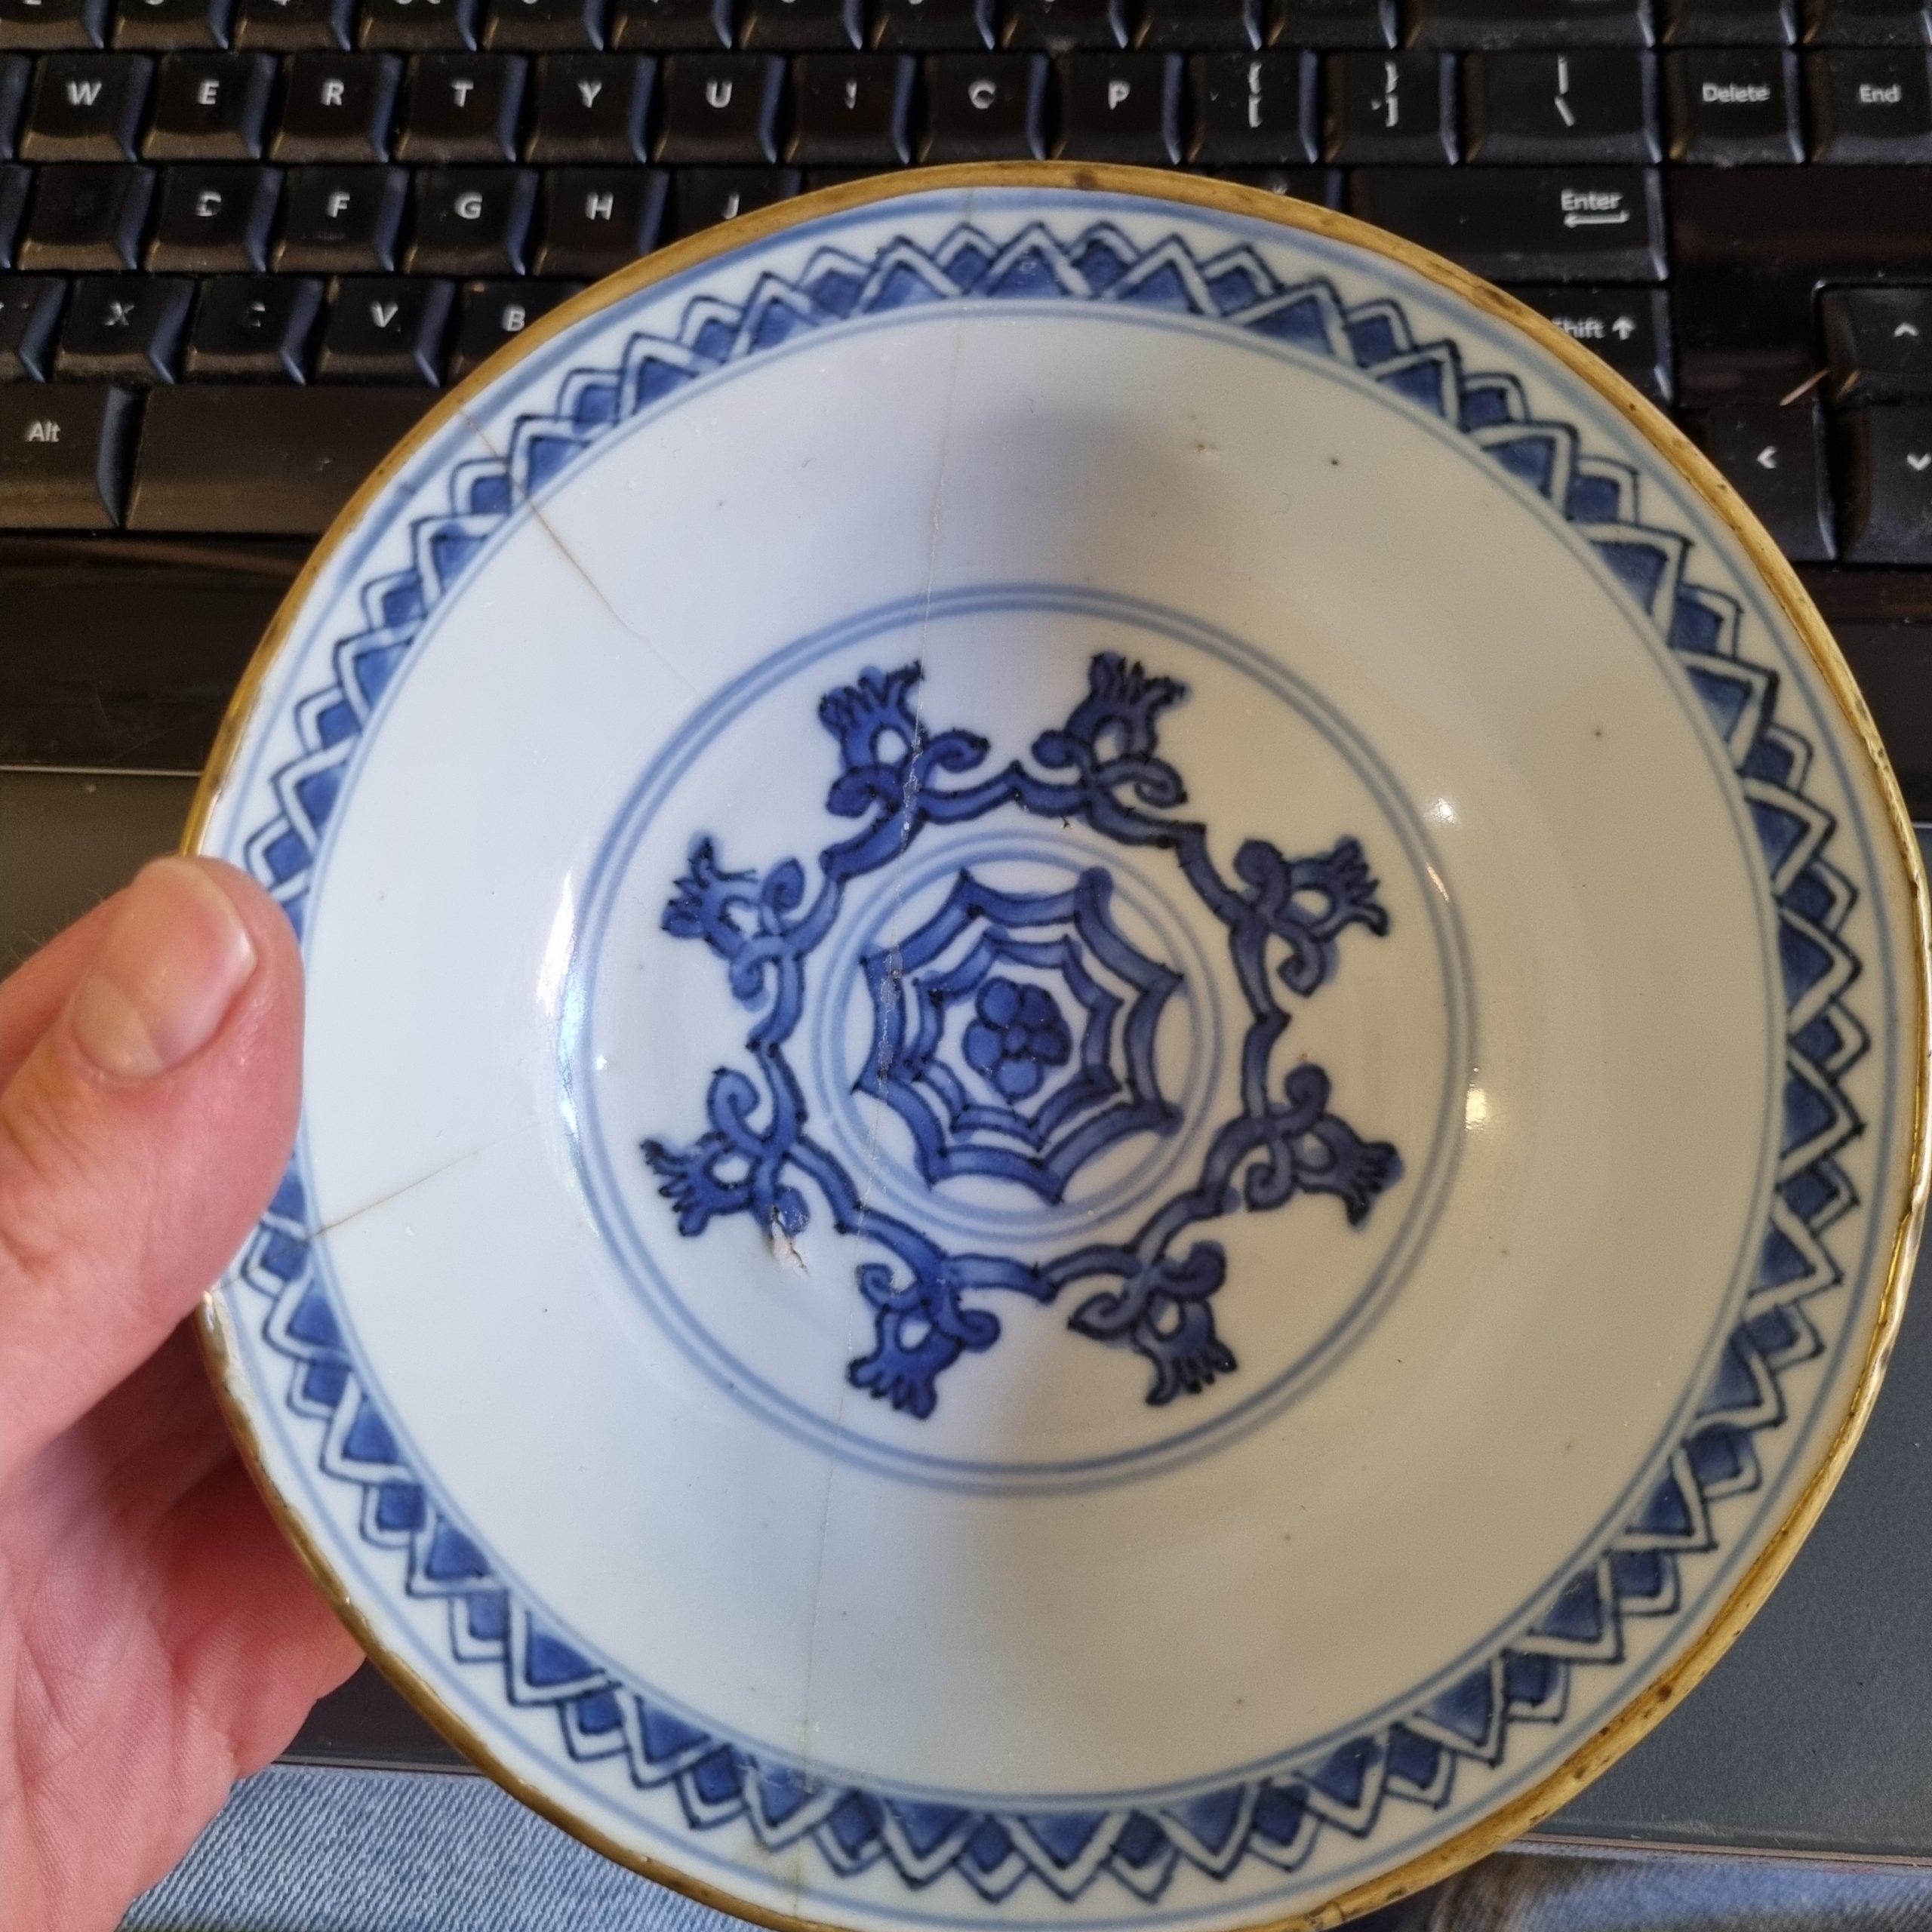 Description

An absolute top quality ming period bowl with typical painting style. The rim is covered with a metal ring. Usually you see these kind of rings on Blue de hue porcelain for the Vietnamese market, but in our opinion this is a Ming